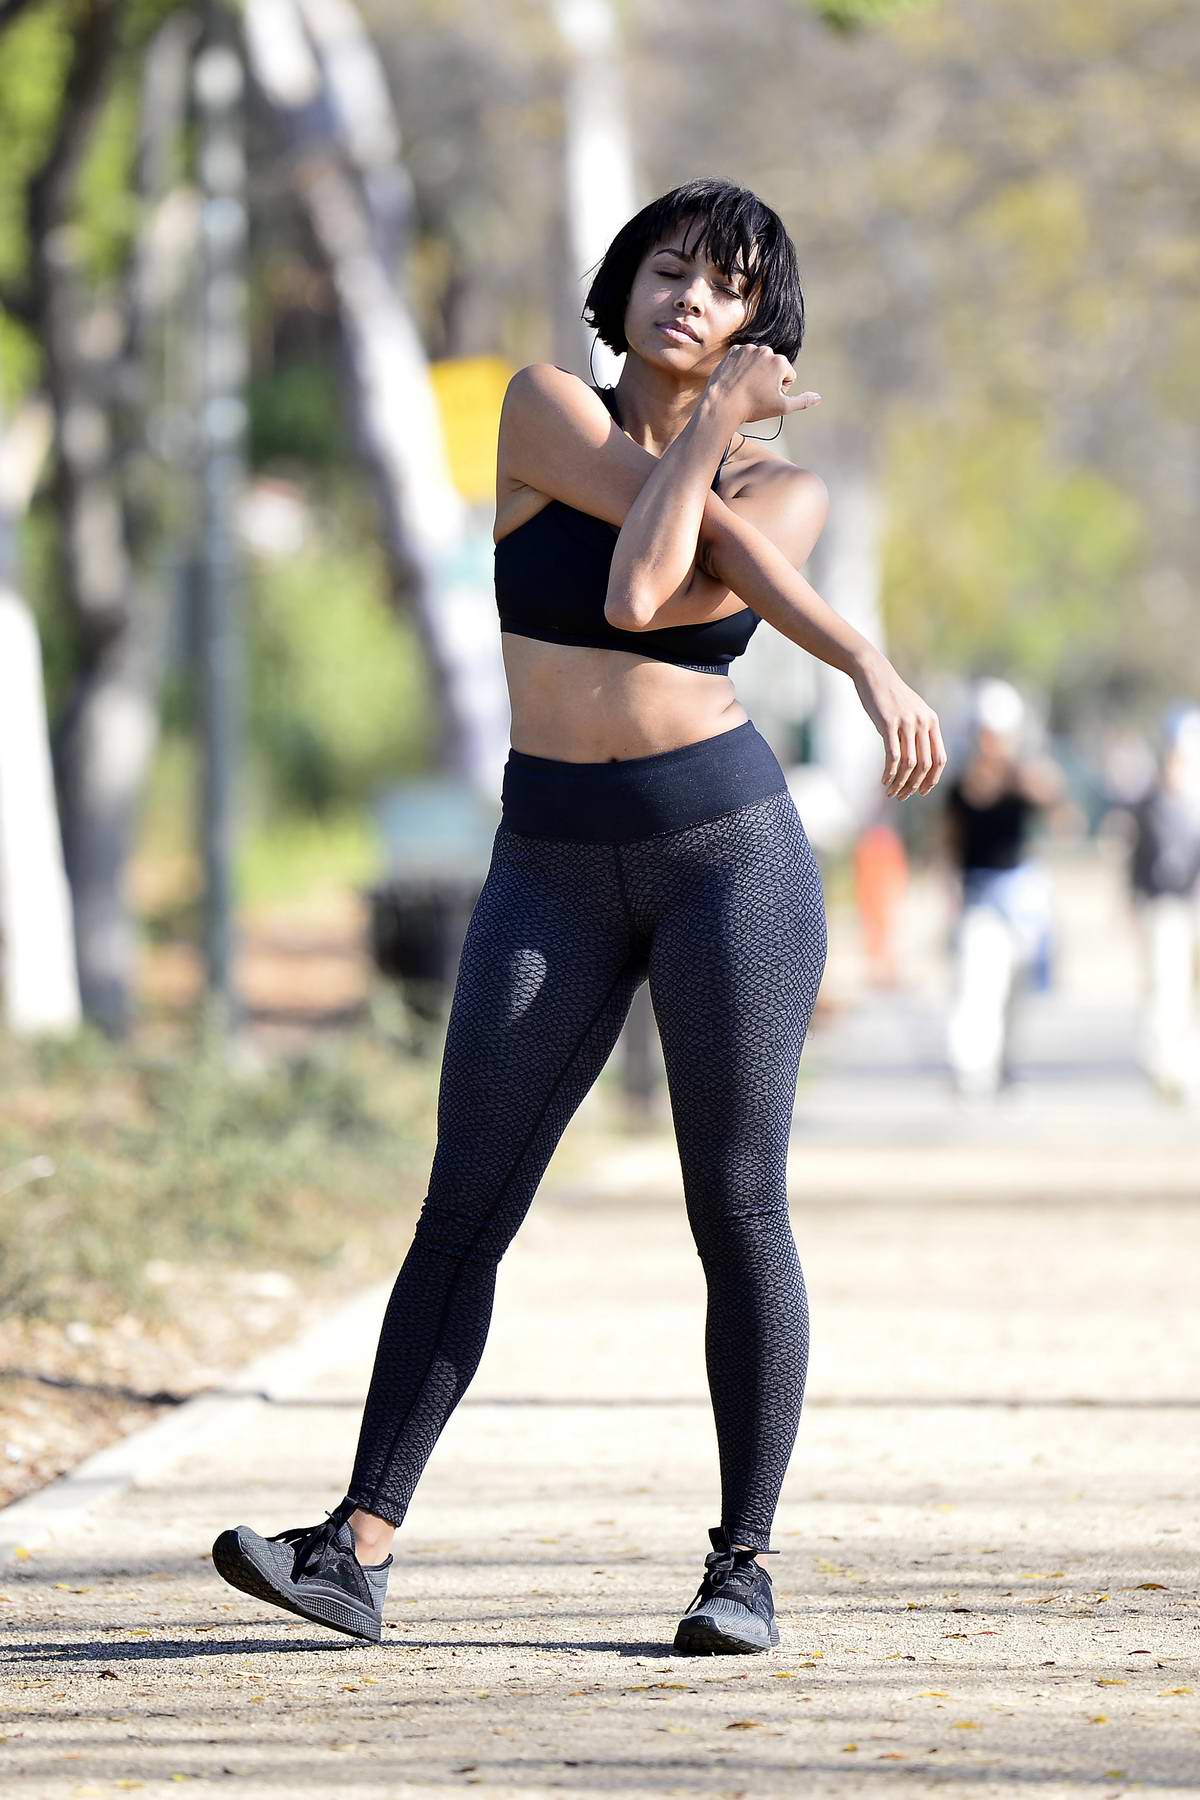 Kat Graham shows off her toned body in a black Under Armour sports